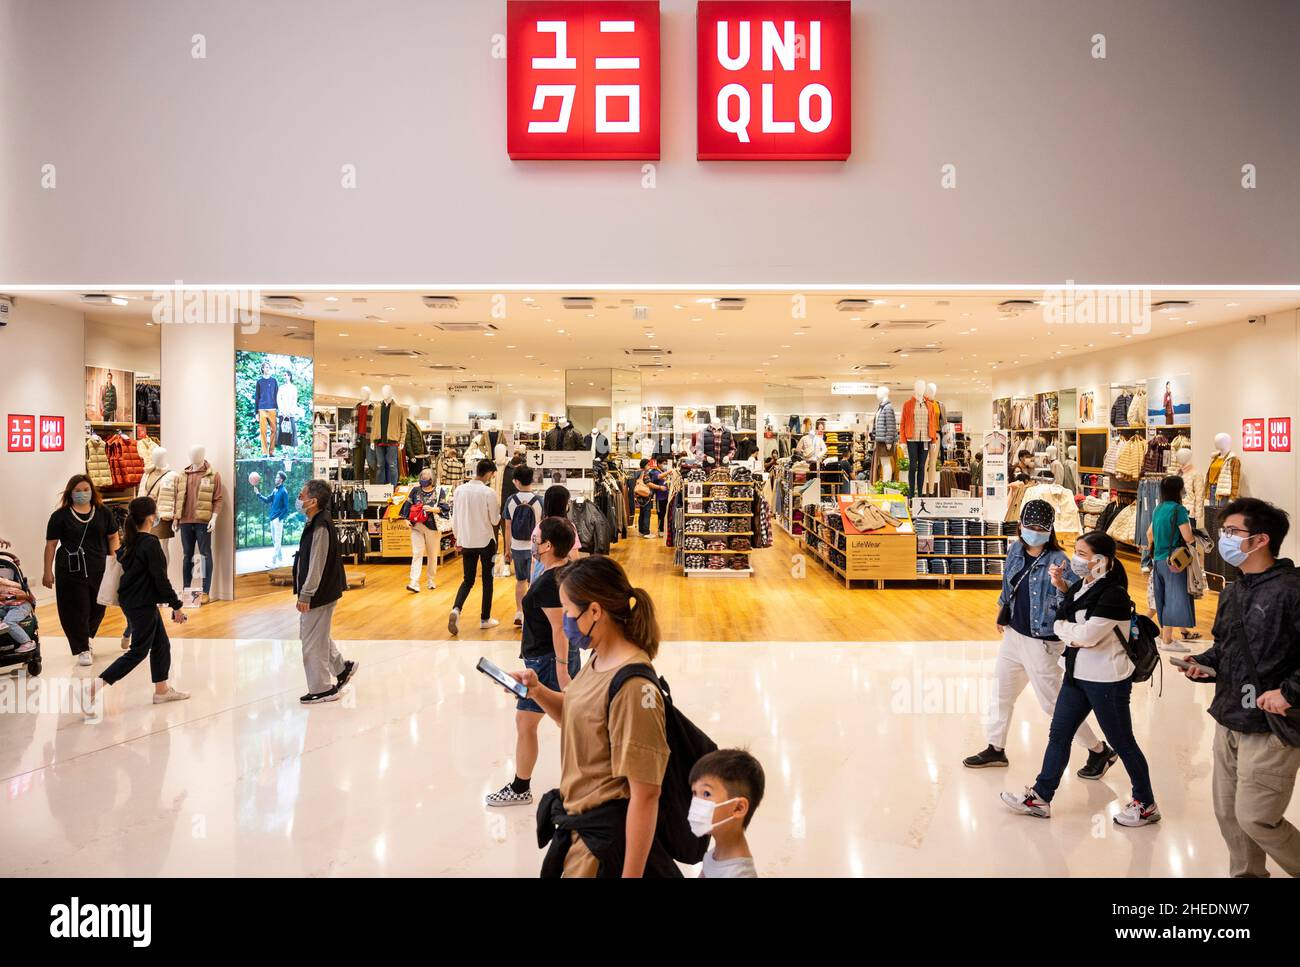 Uniqlo logo brand and text red sign store clothes shop from Japan Stock  Photo  Adobe Stock